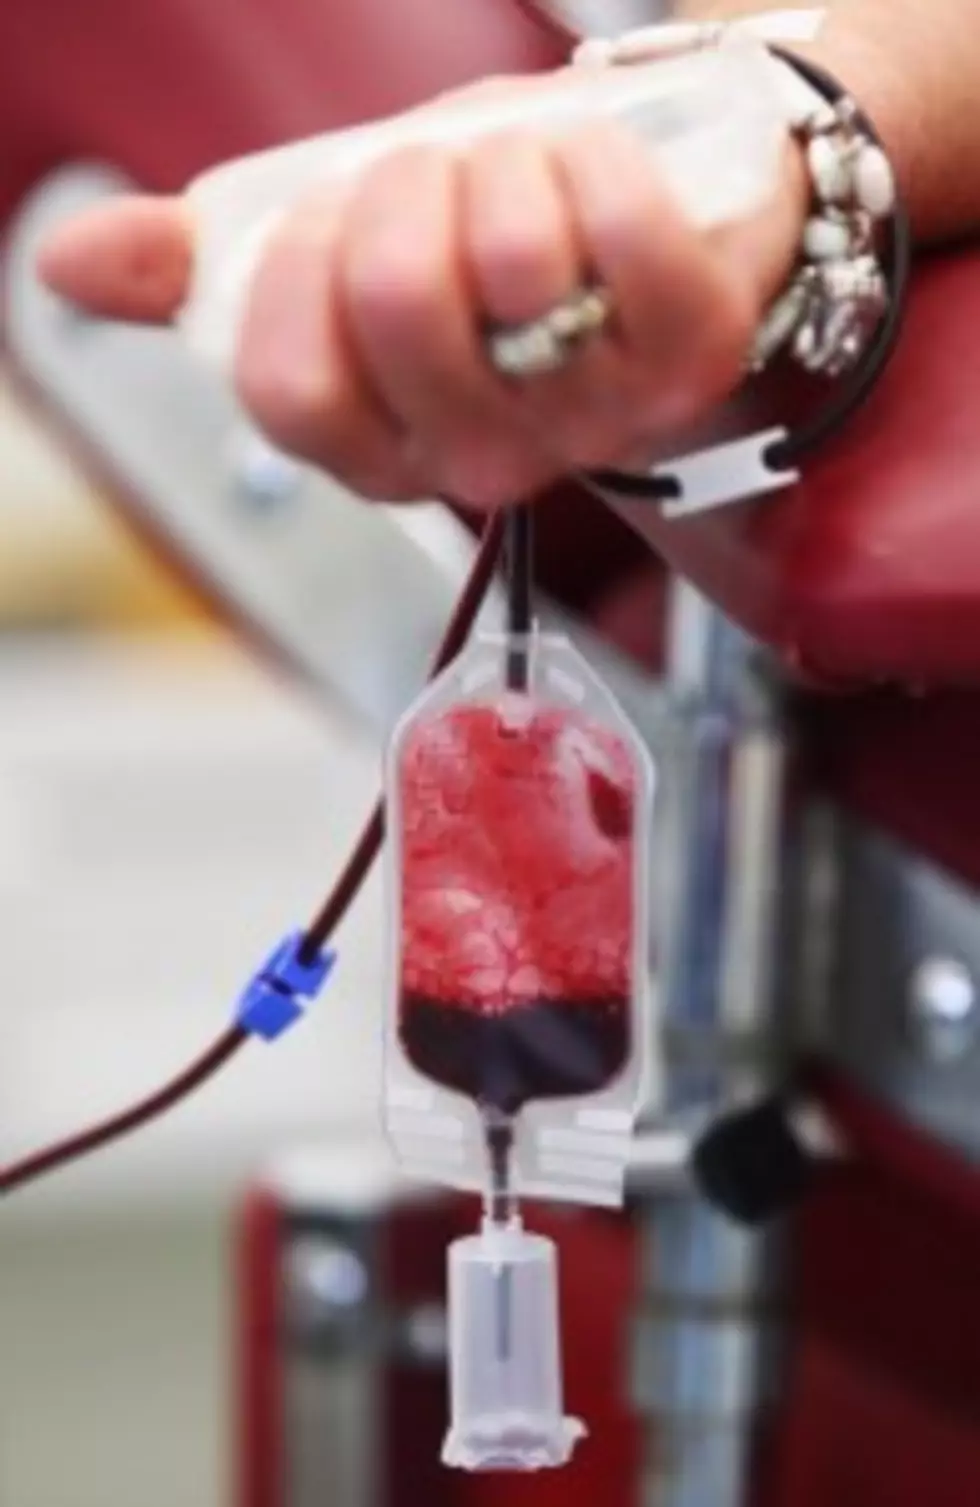 United Blood Services Needs Your Help (Blood!)